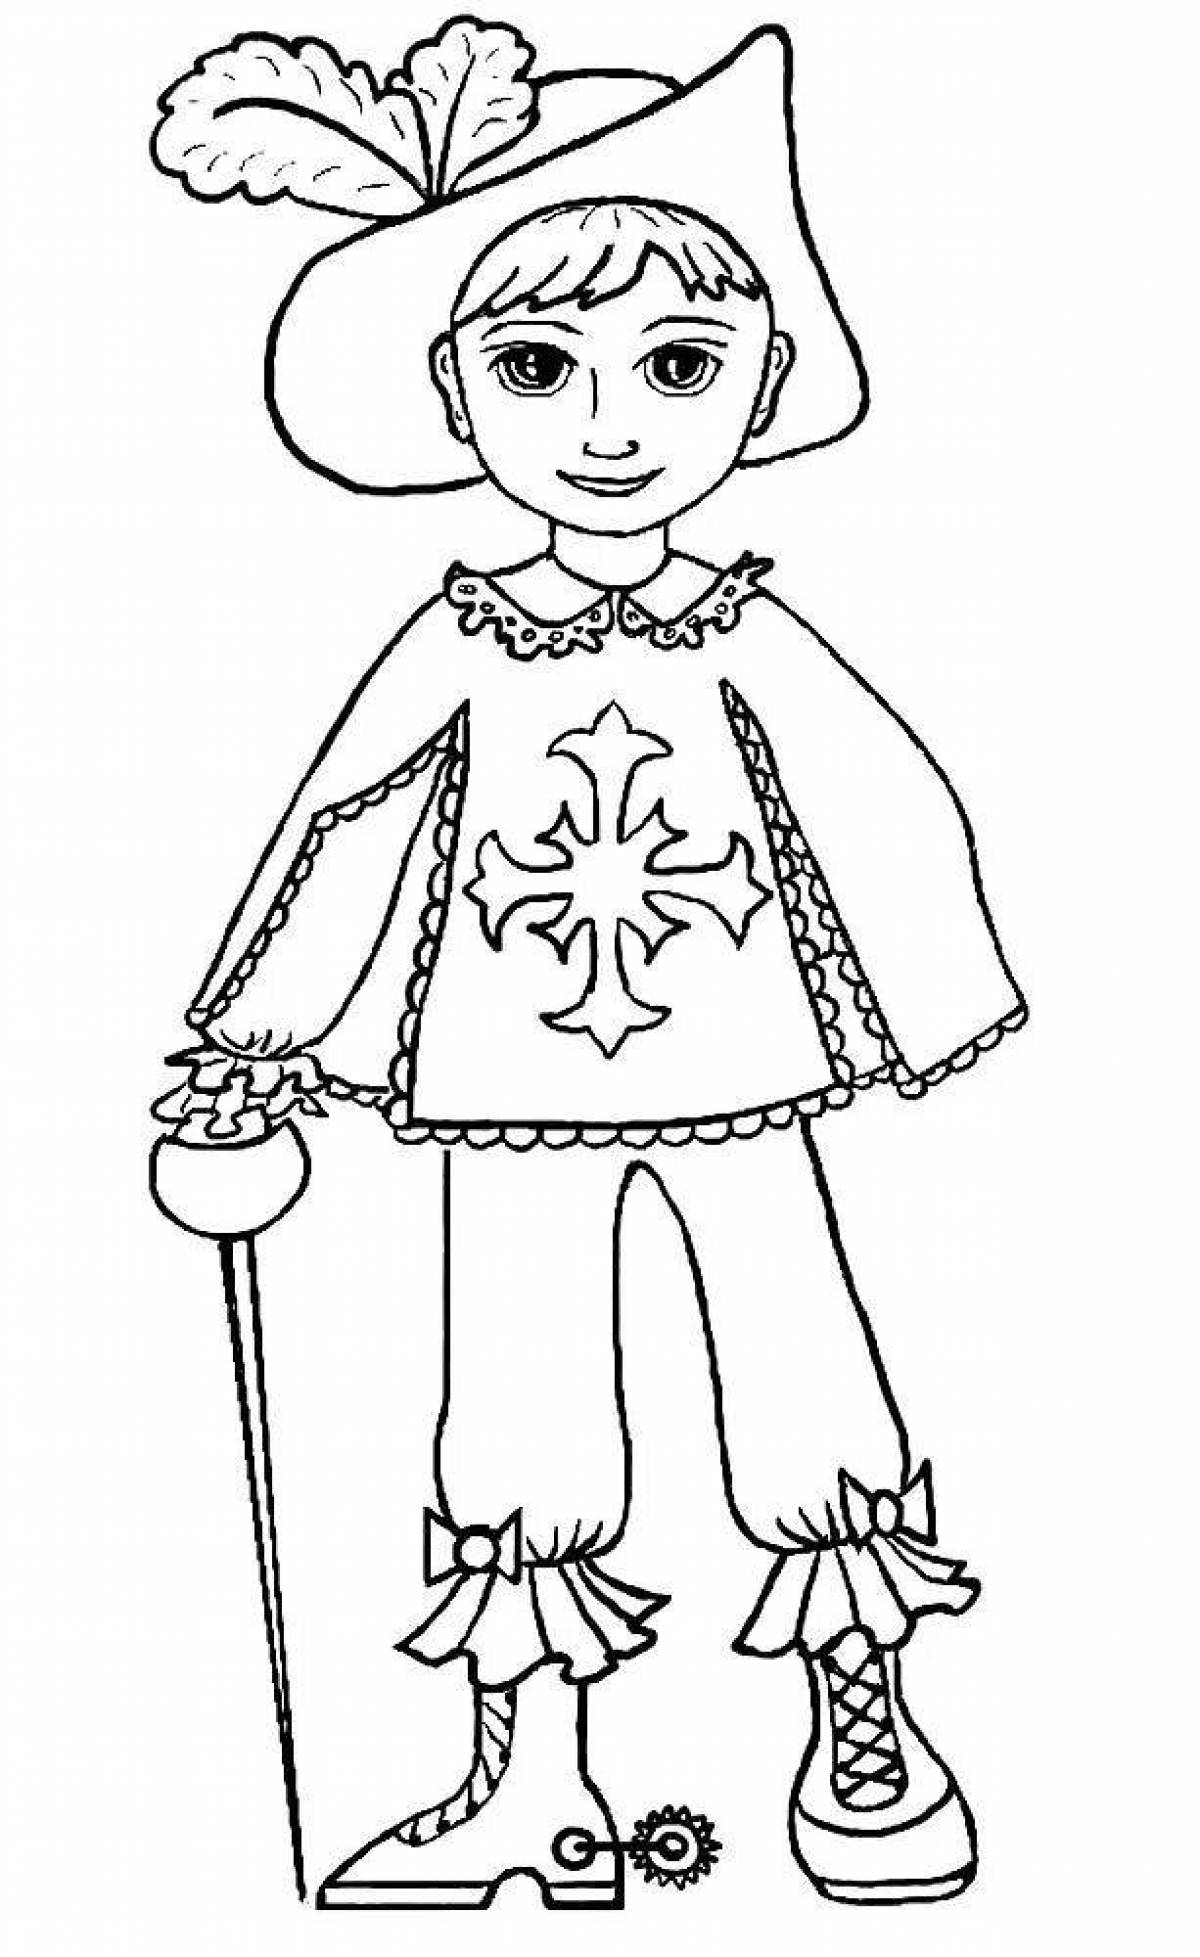 Coloring page gentle theatrical costume